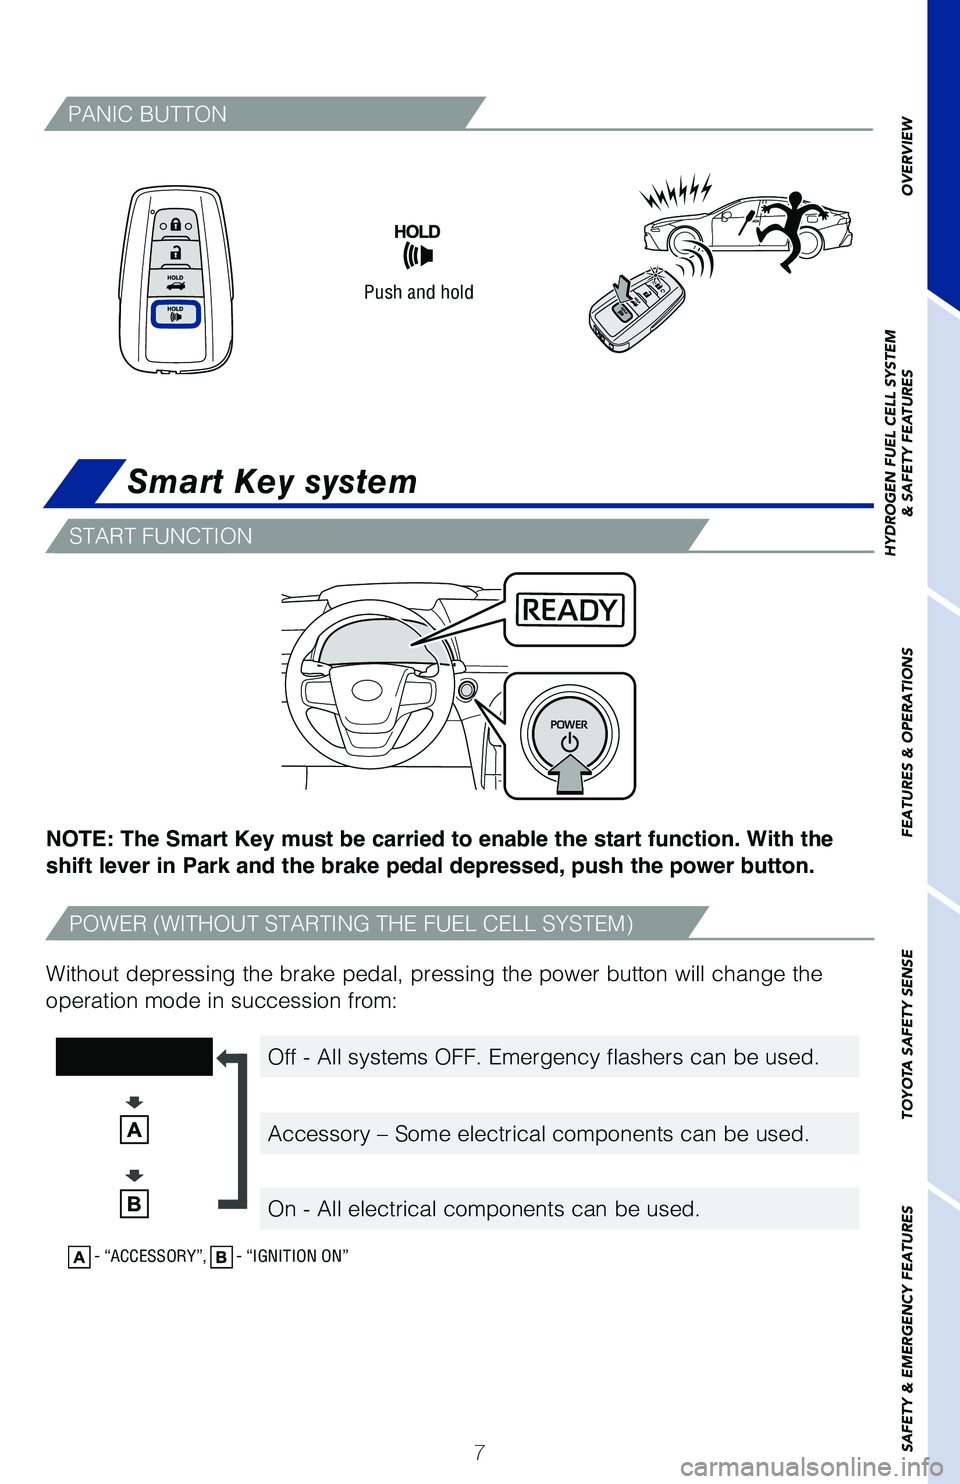 TOYOTA MIRAI 2021  Owners Manual (in English) 7
Smart Key system
Push and hold
Without depressing the brake pedal, pressing the power button will chang\
e the 
operation mode in succession from:
PANIC BUTTON
OVERVIEW
HYDROGEN FUEL CELL SYSTEM
& S